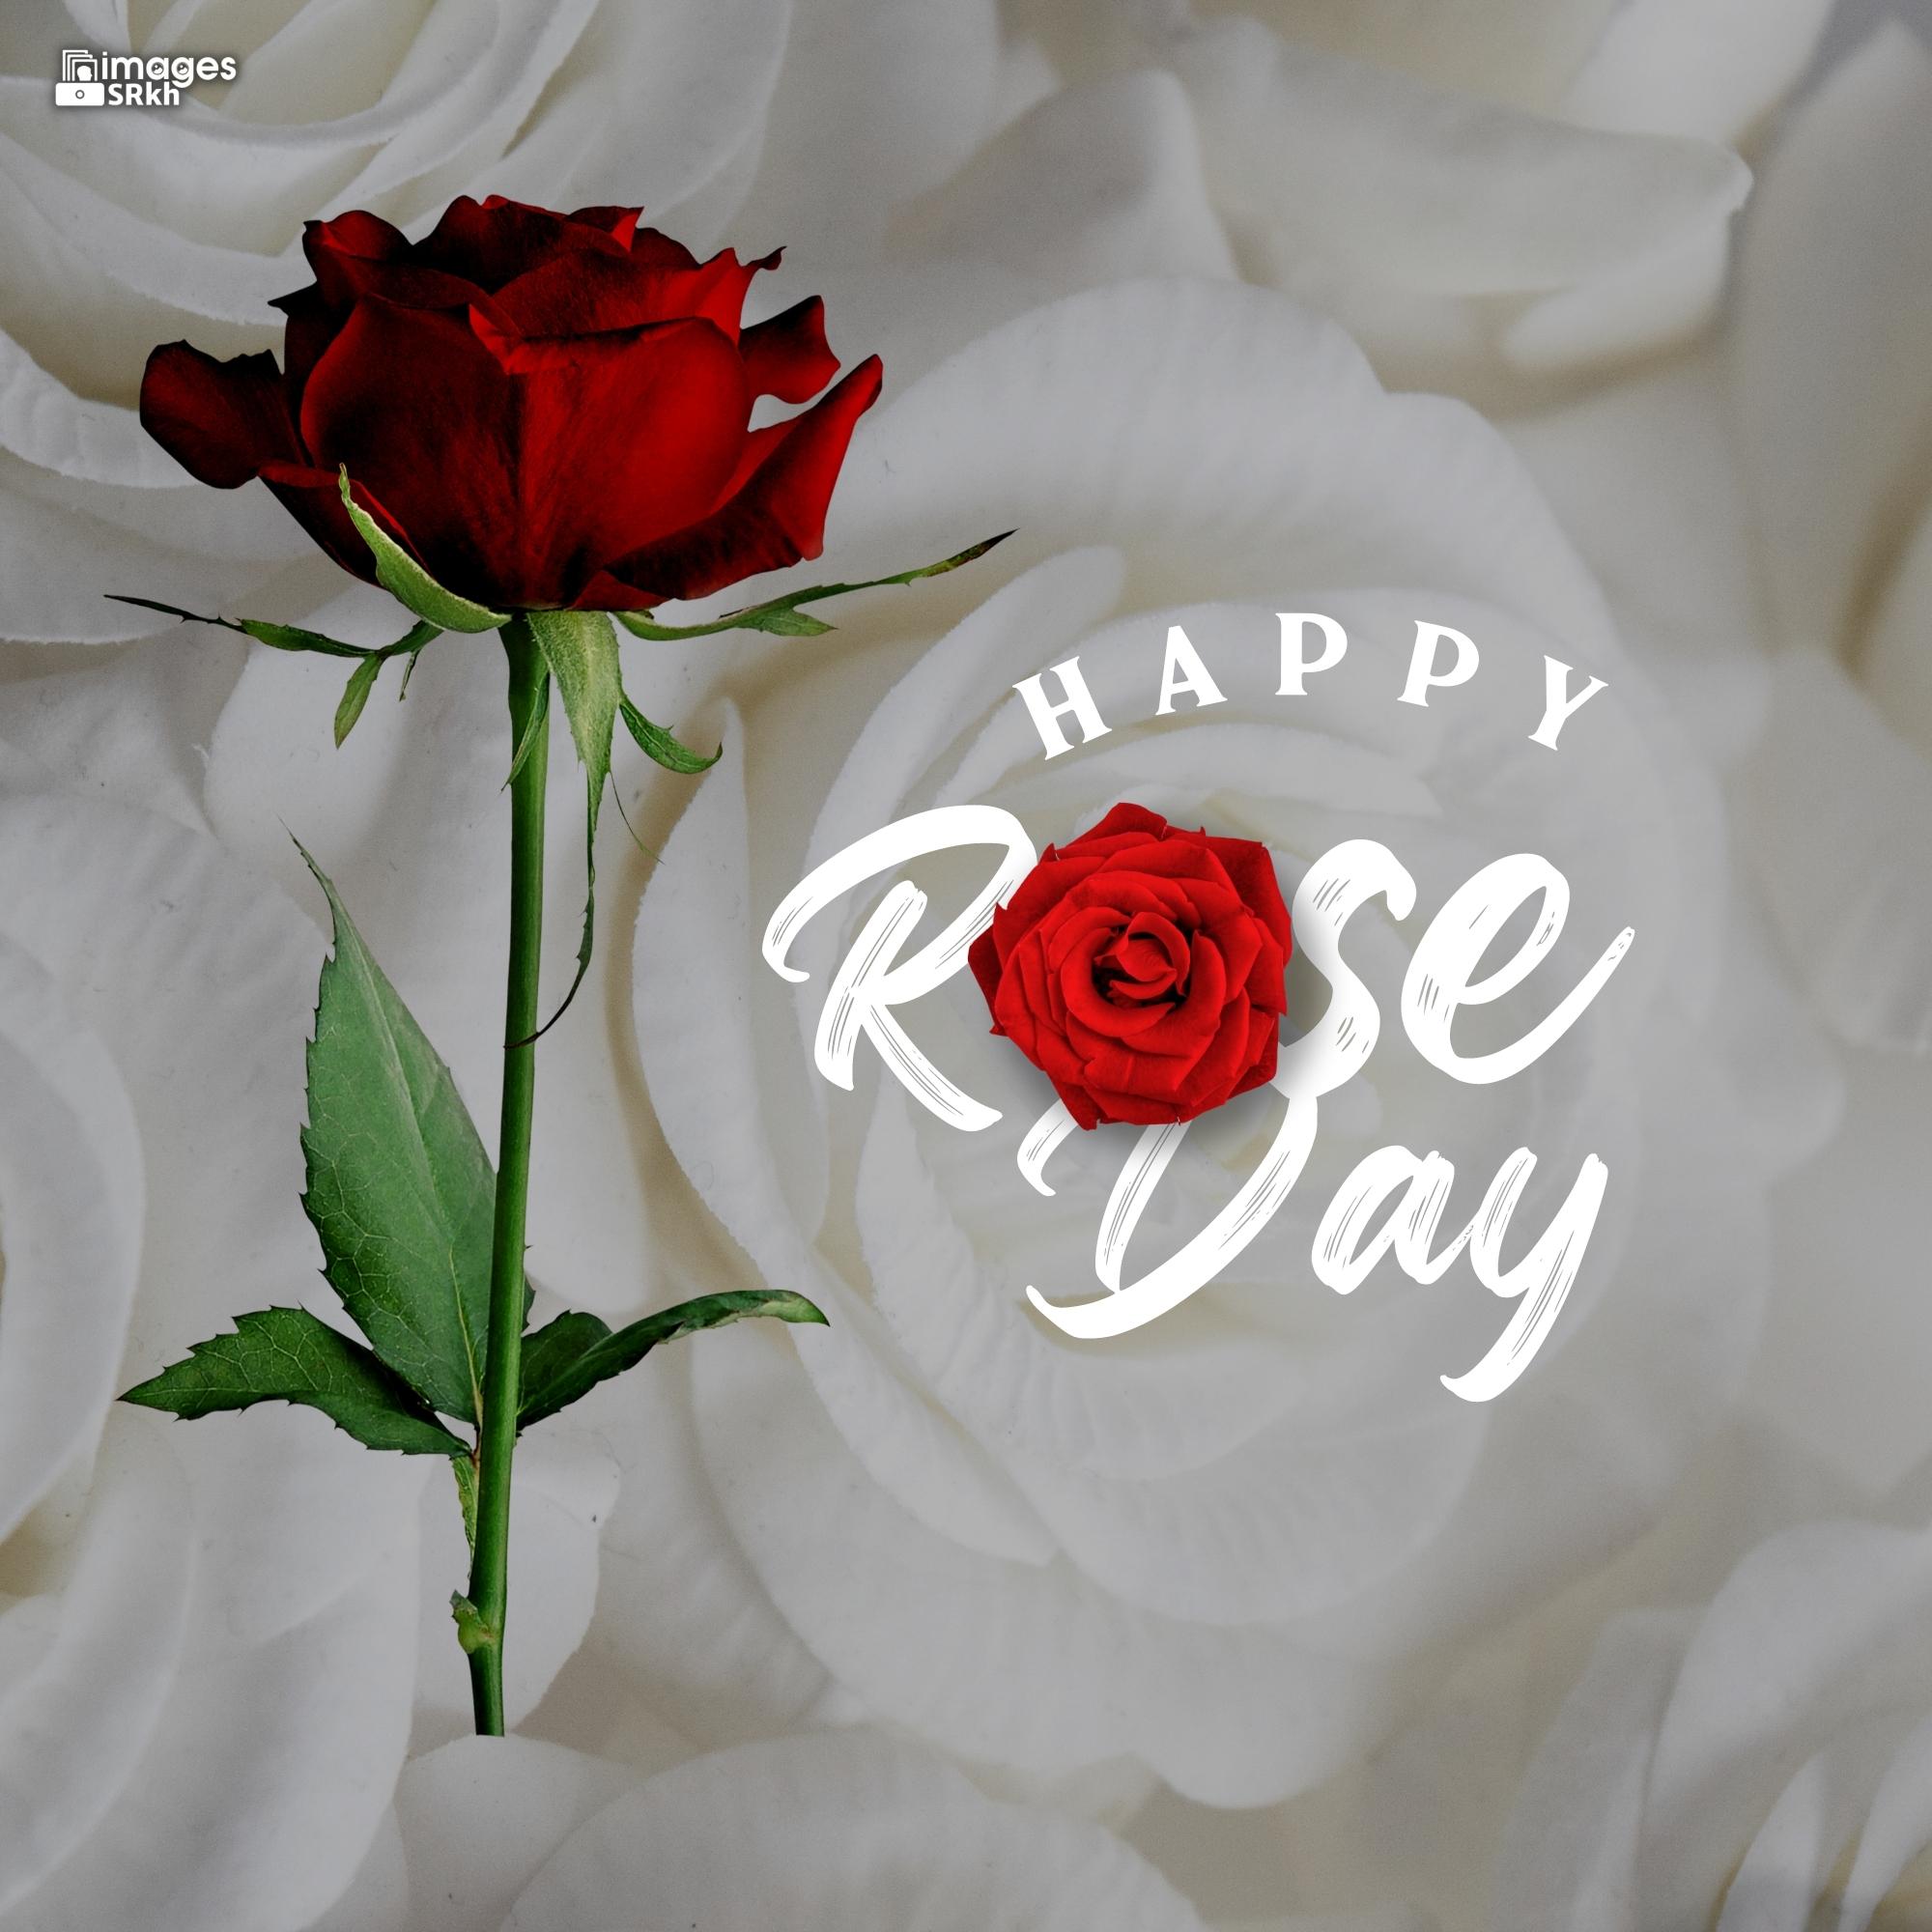 Happy Rose Day Image Hd Download (4)